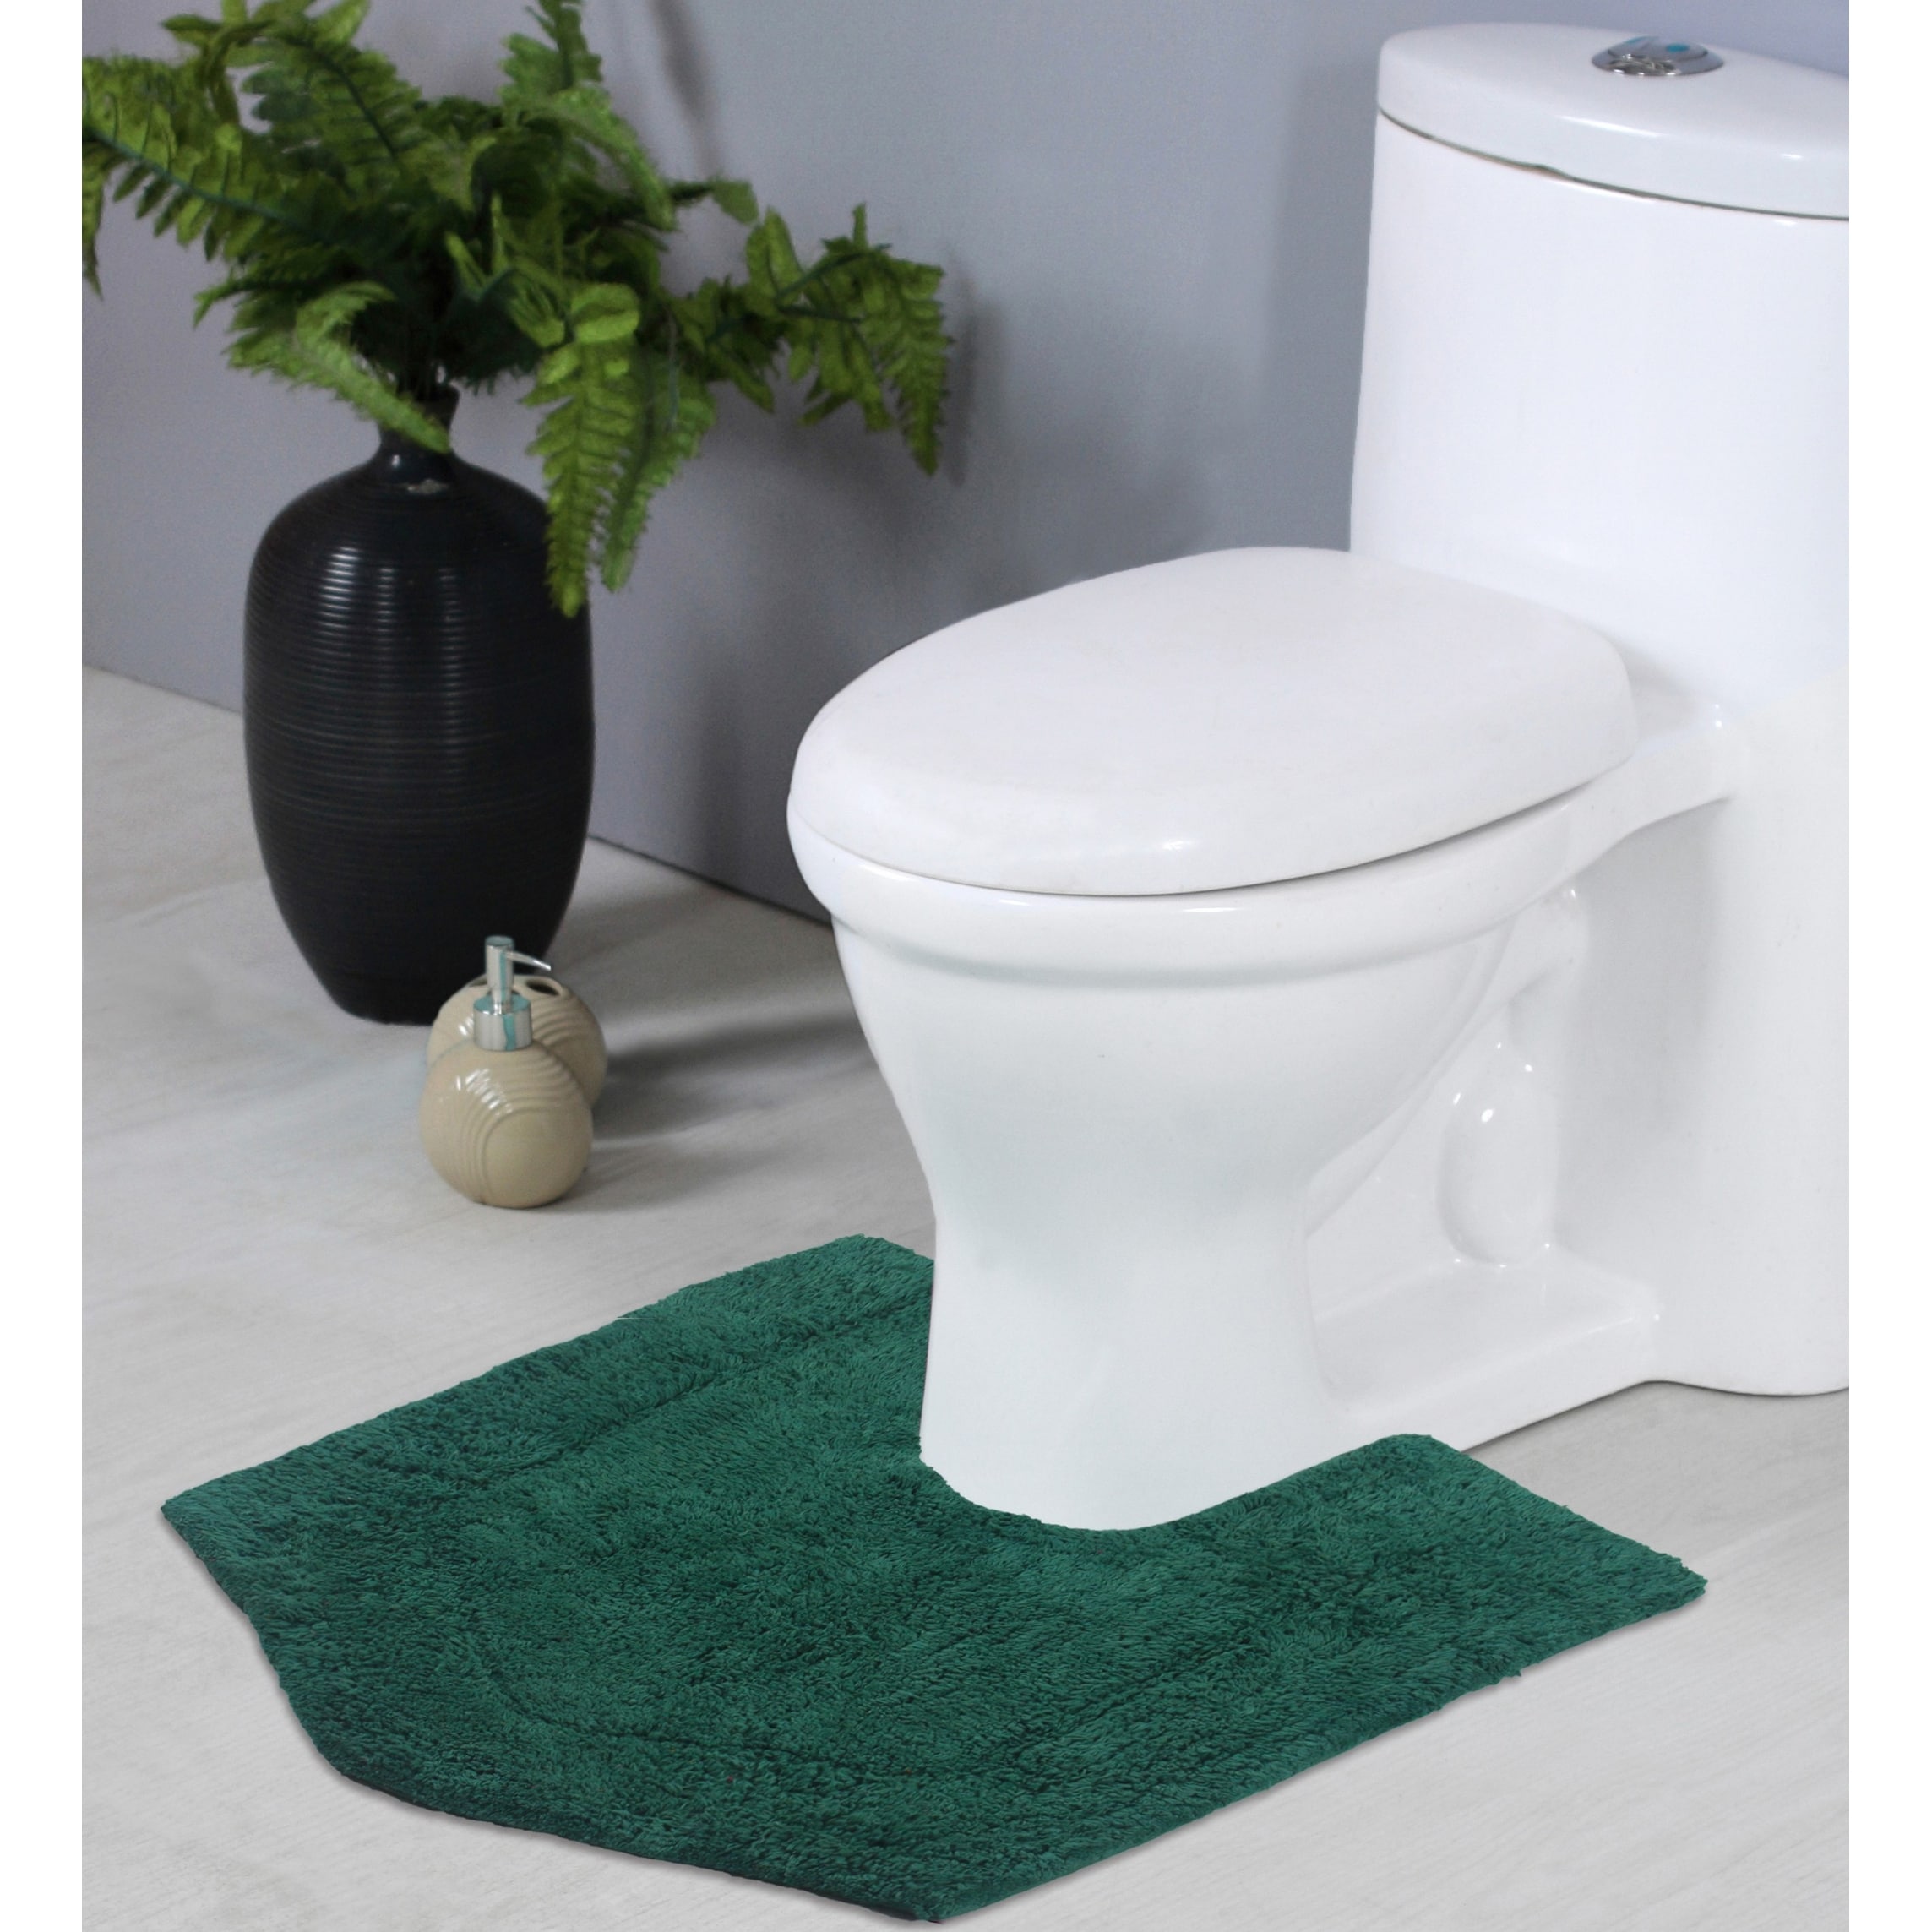 https://ak1.ostkcdn.com/images/products/is/images/direct/d2656d8a27cfc5d54f9934ea244153033b16c9e2/Home-Weavers-WatreFord-Collection-Thick-Toilet-Bath-Rugs-U-Shaped-Contour-Non-Slip-Cotton-Soft-Absorbe-Machine-Washable-20%22x20%22.jpg